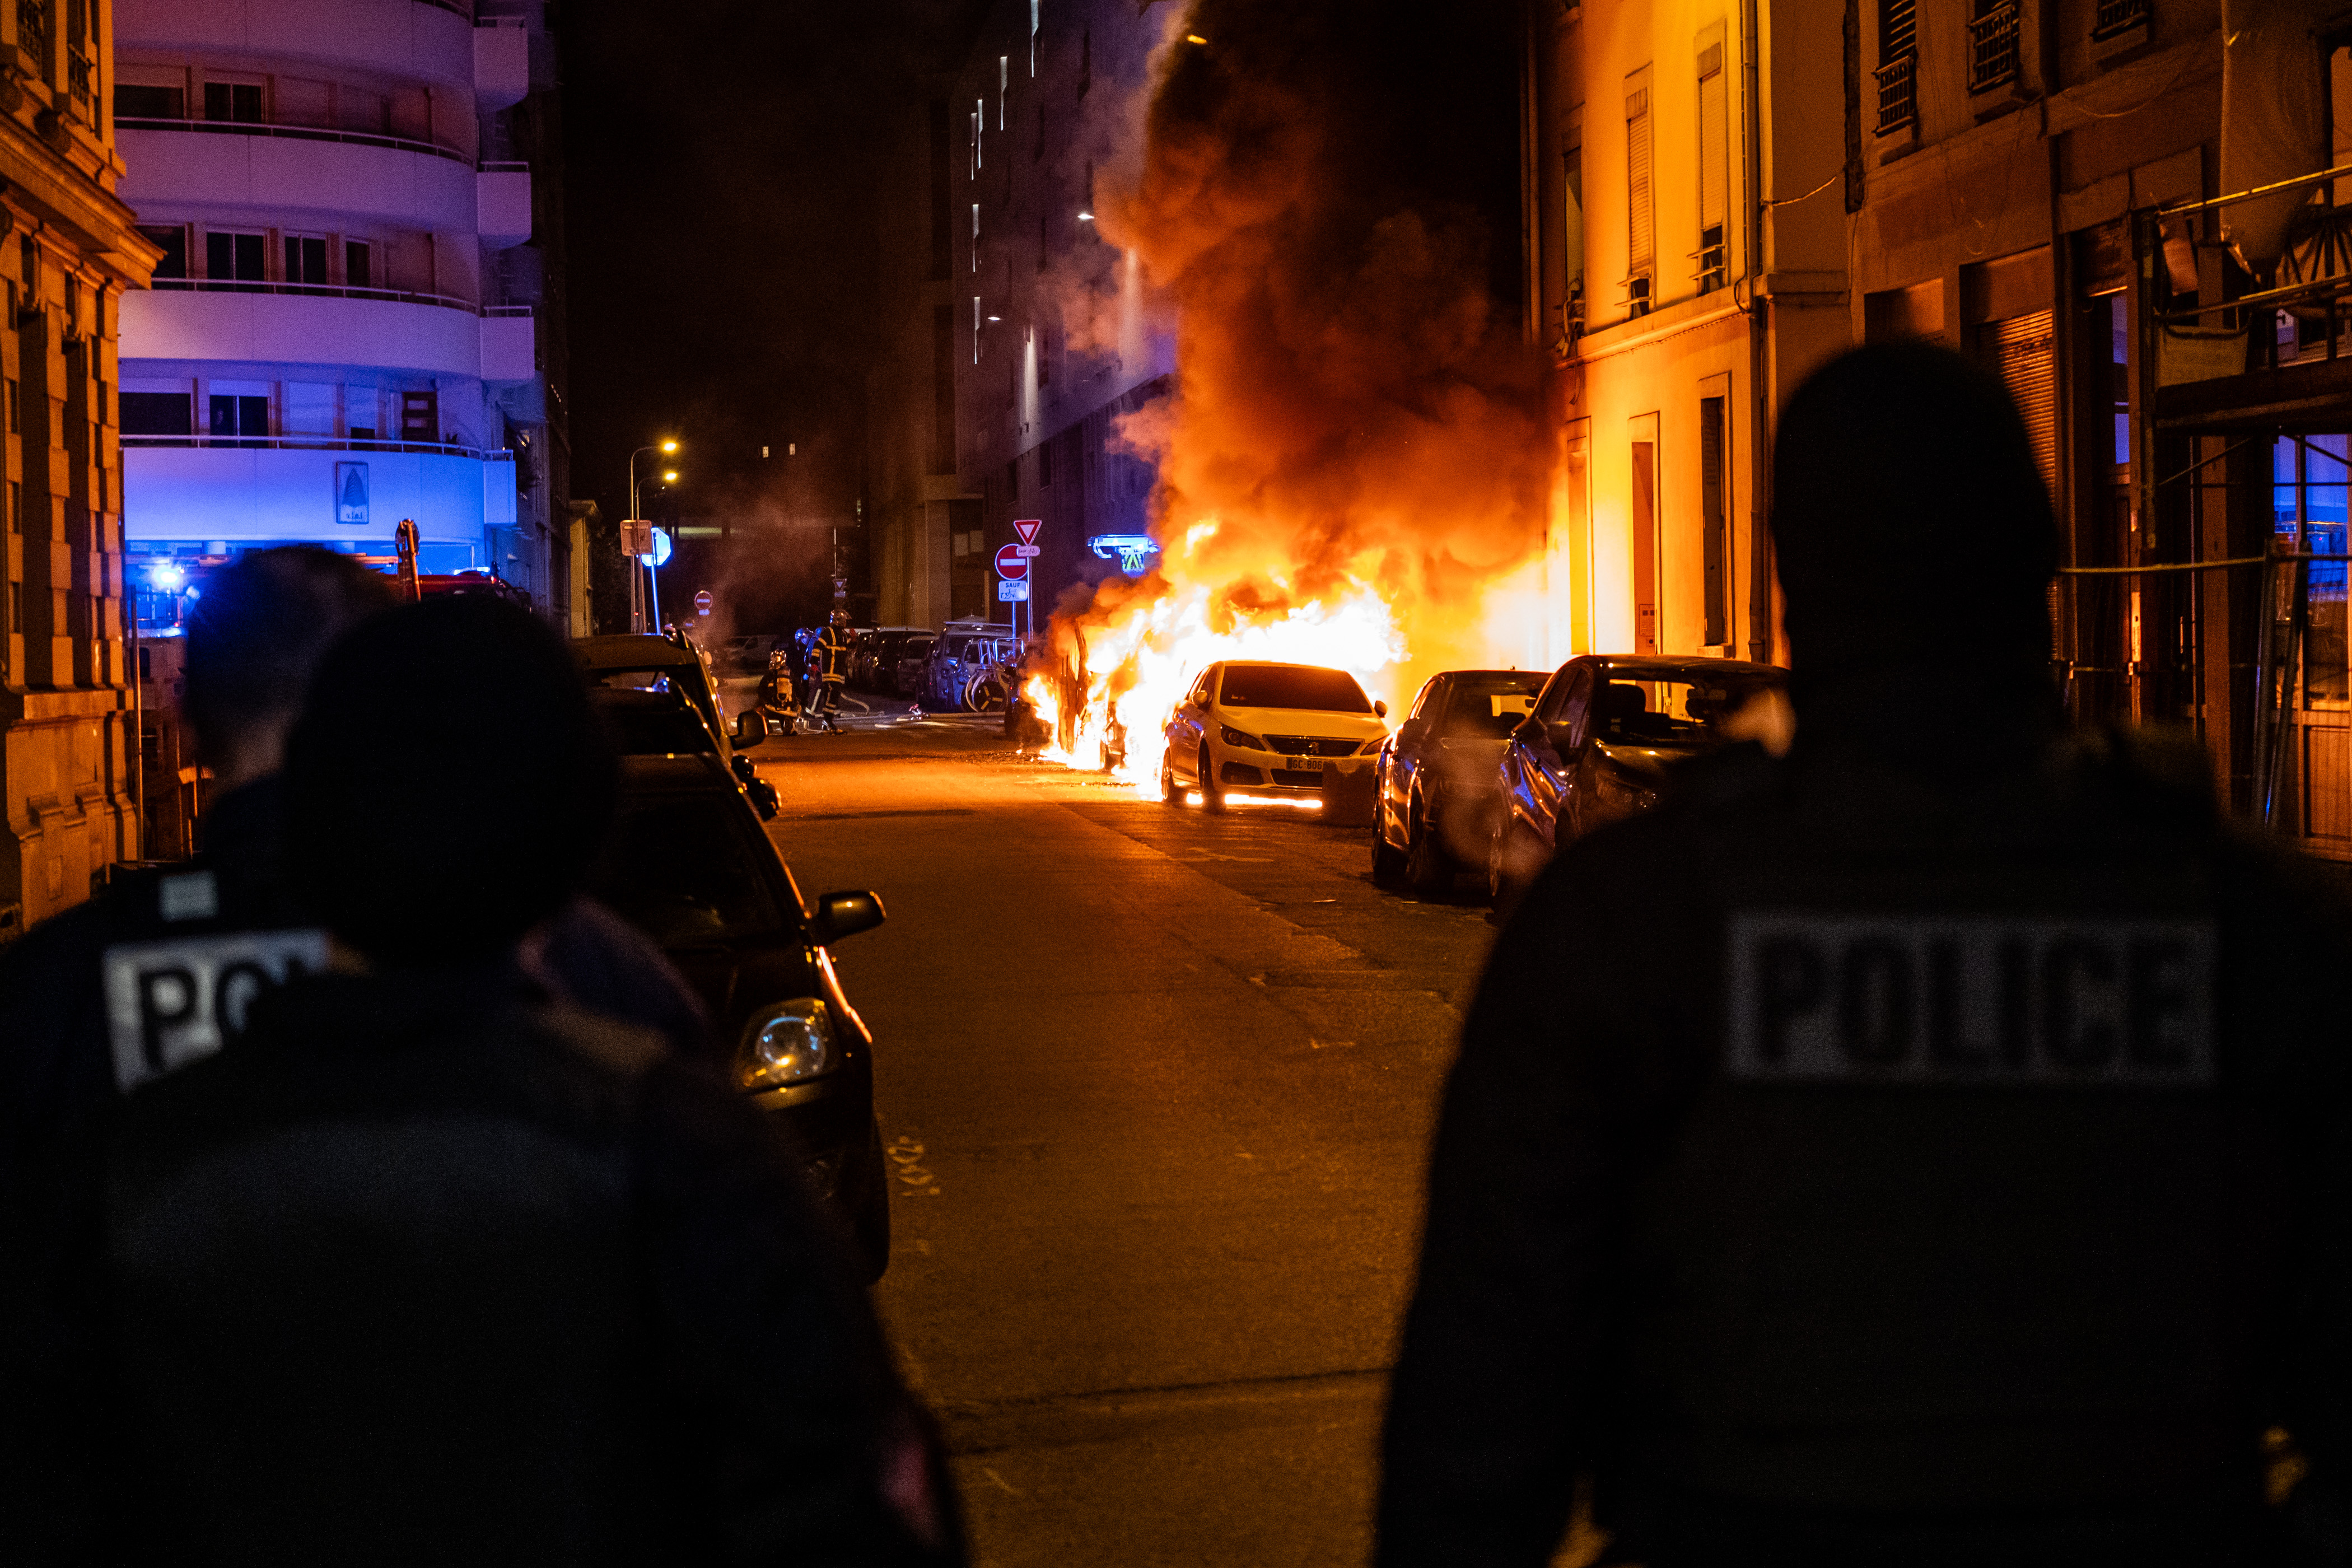 Islamophobia and anti-immigrant sentiment dominate misinformation around France violence